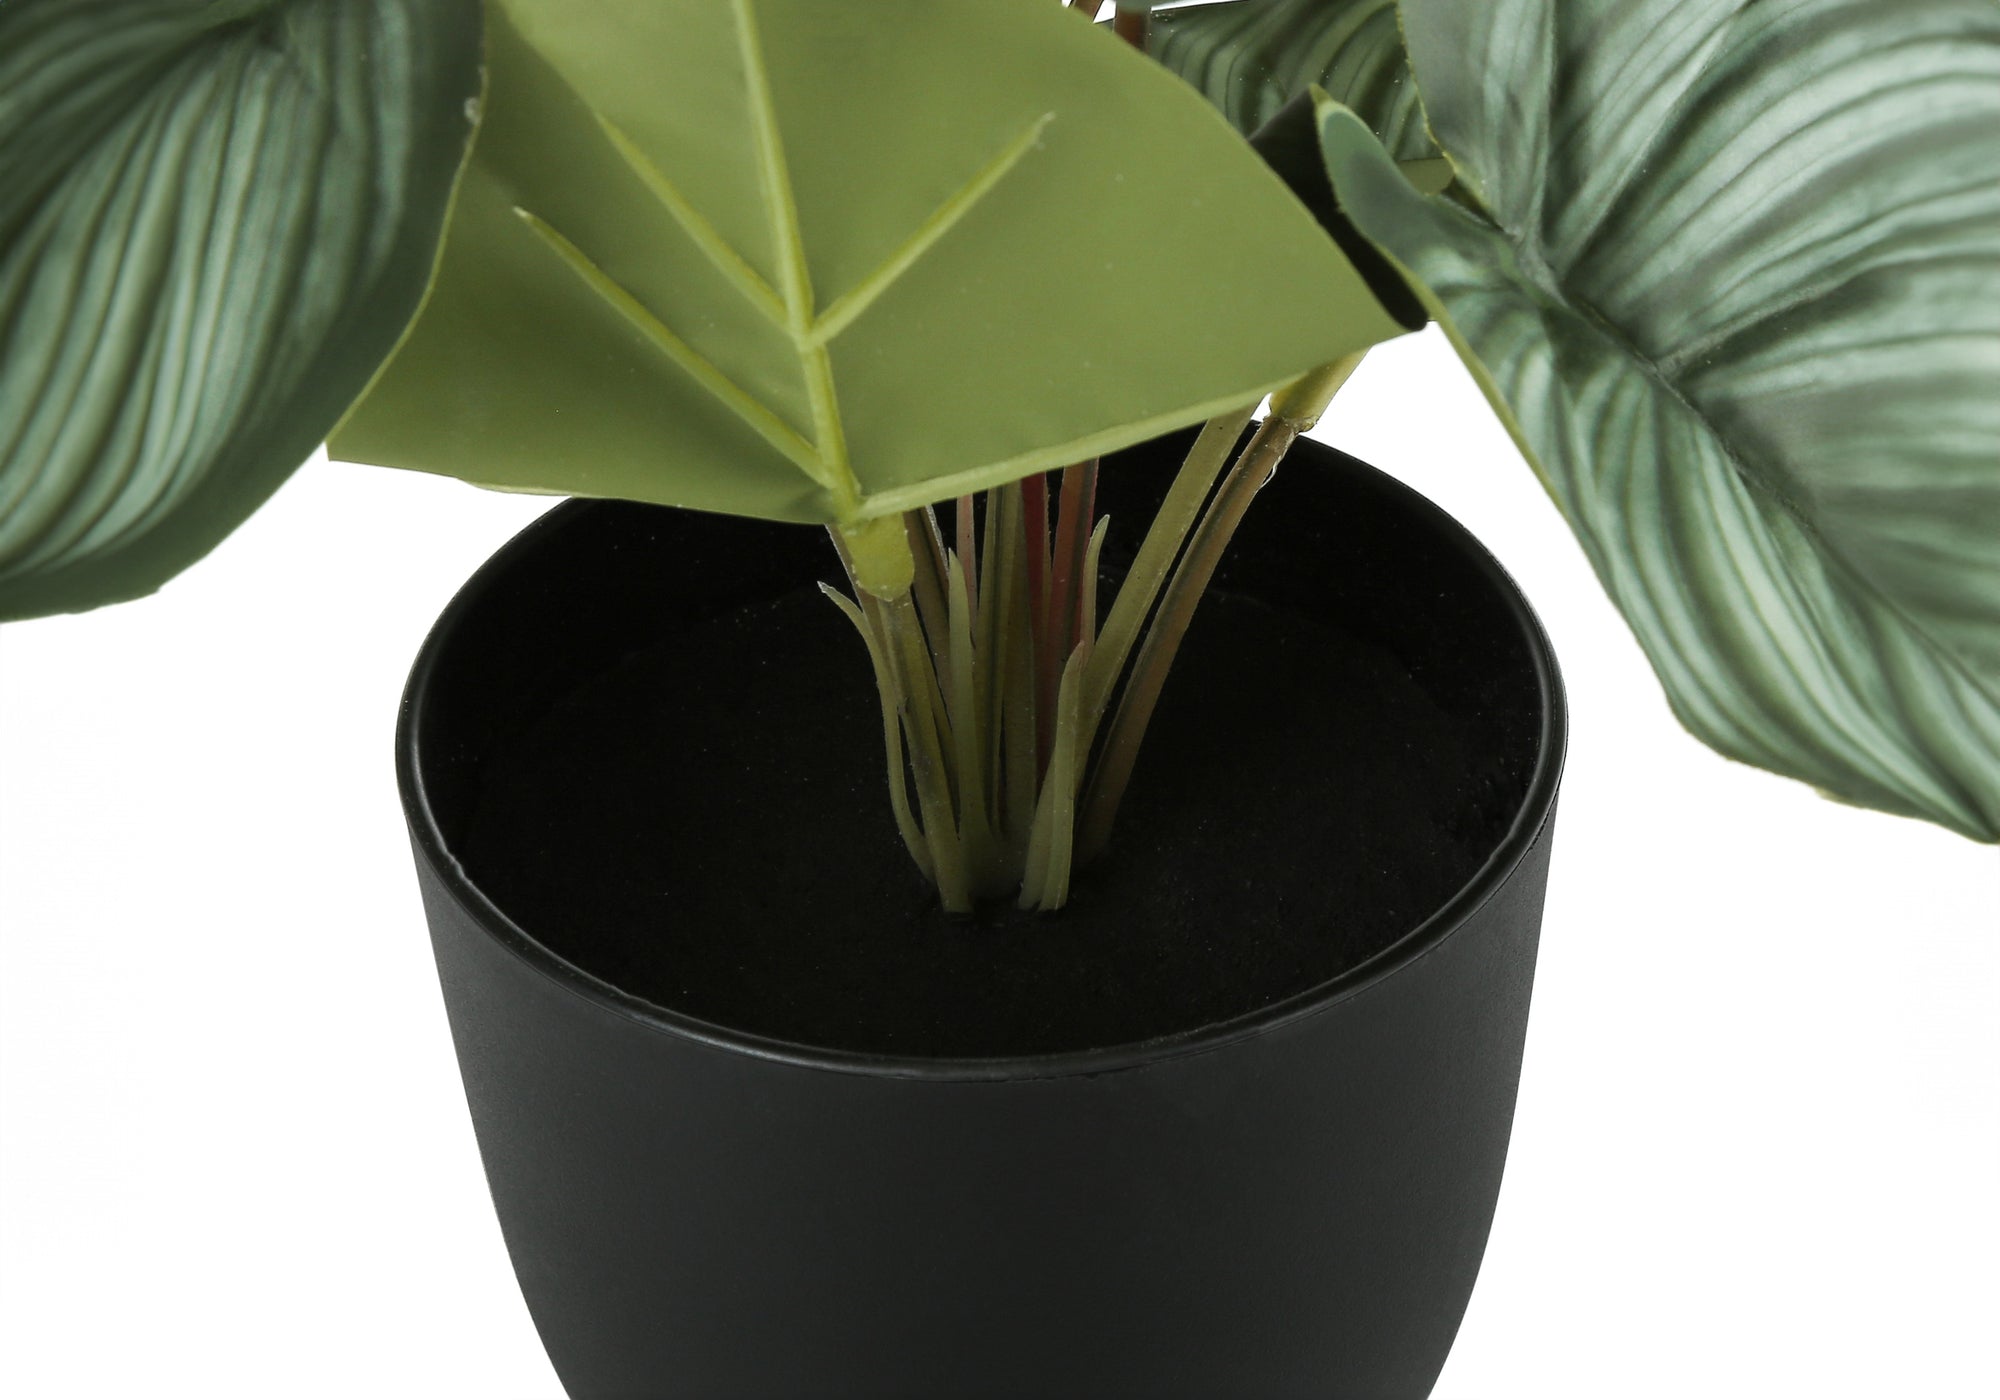 MN-739583    Artificial Plant, 13" Tall, Epipremnum, Indoor, Faux, Fake, Table, Greenery, Potted, Set Of 2, Decorative, Green Leaves, Black Pots